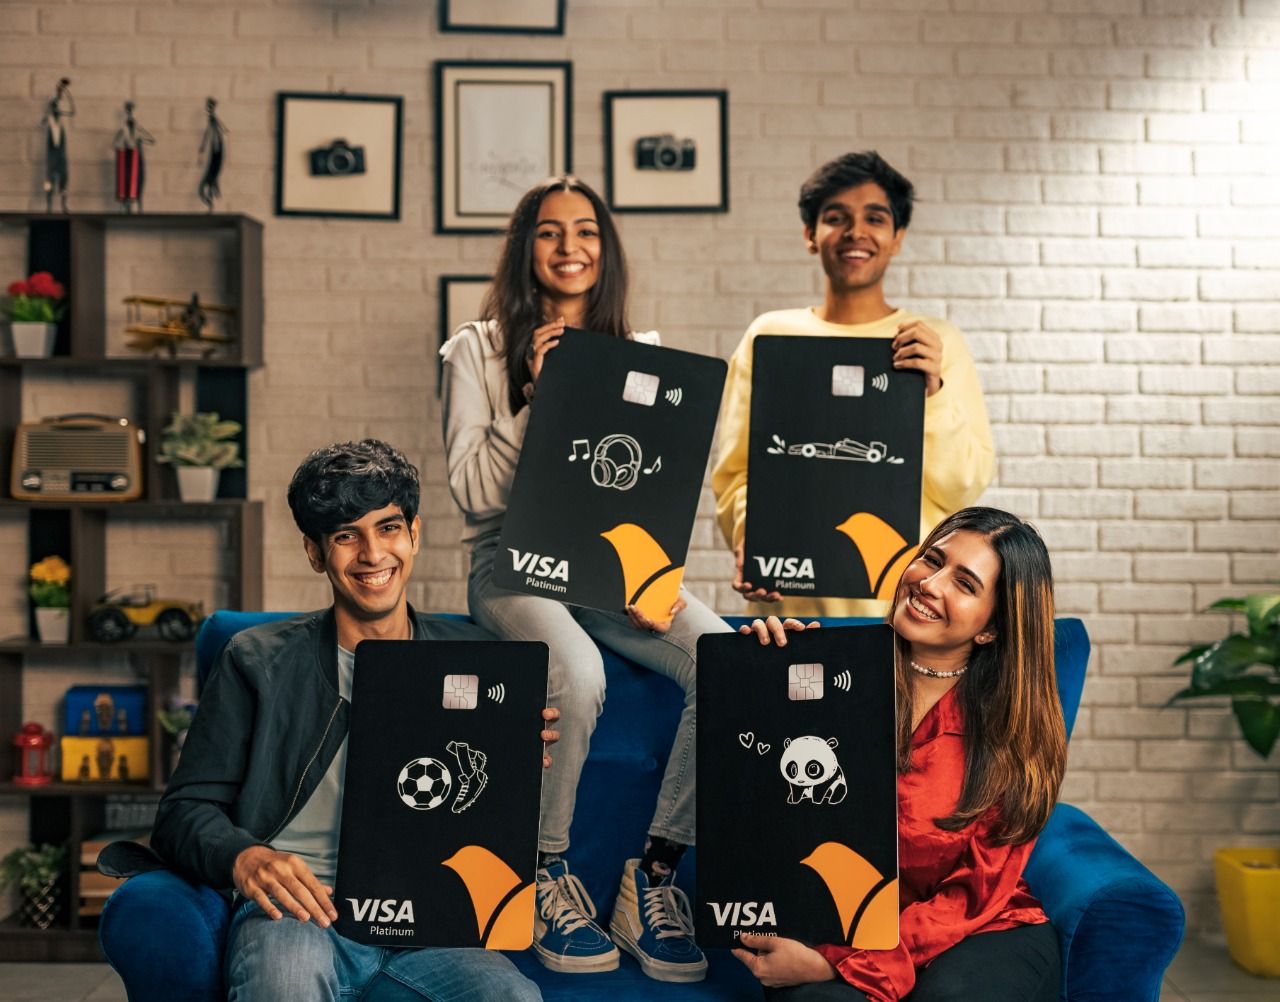 FamPay partners with Visa to launch India’s first Doodle Card for GenZ